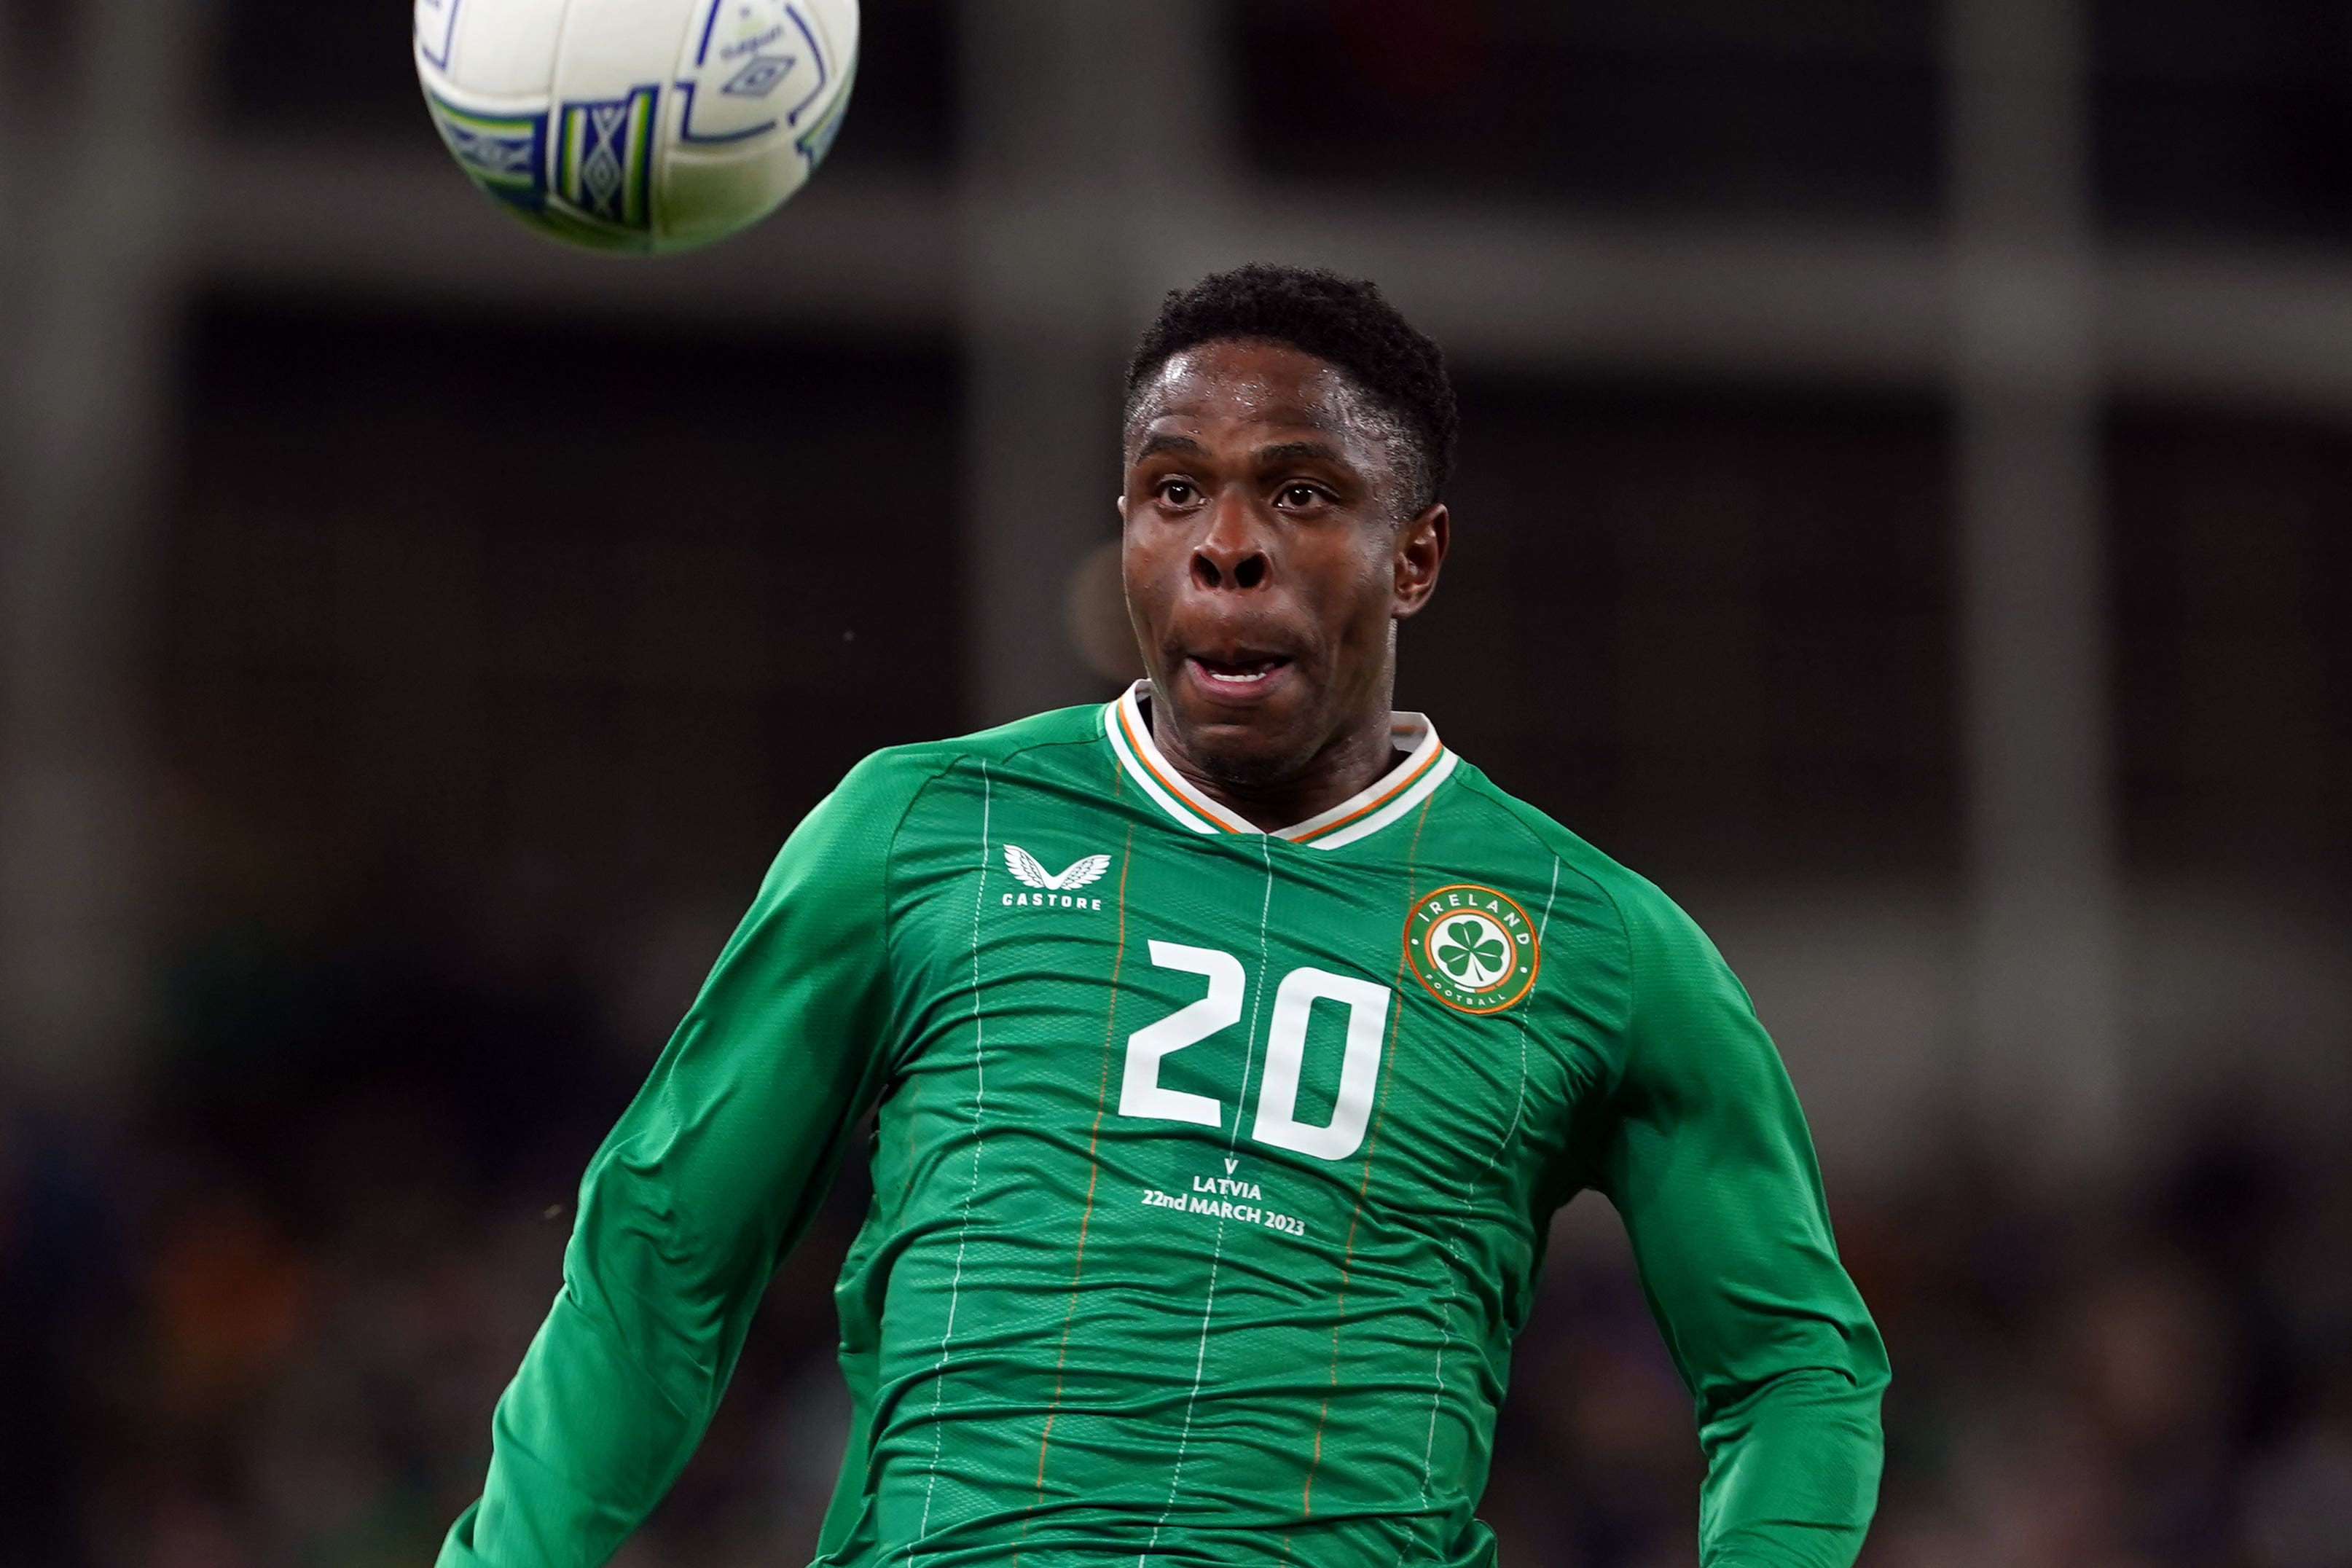 Chiedozie Ogbene is the first Nigerian-born player to represent the Republic of Ireland